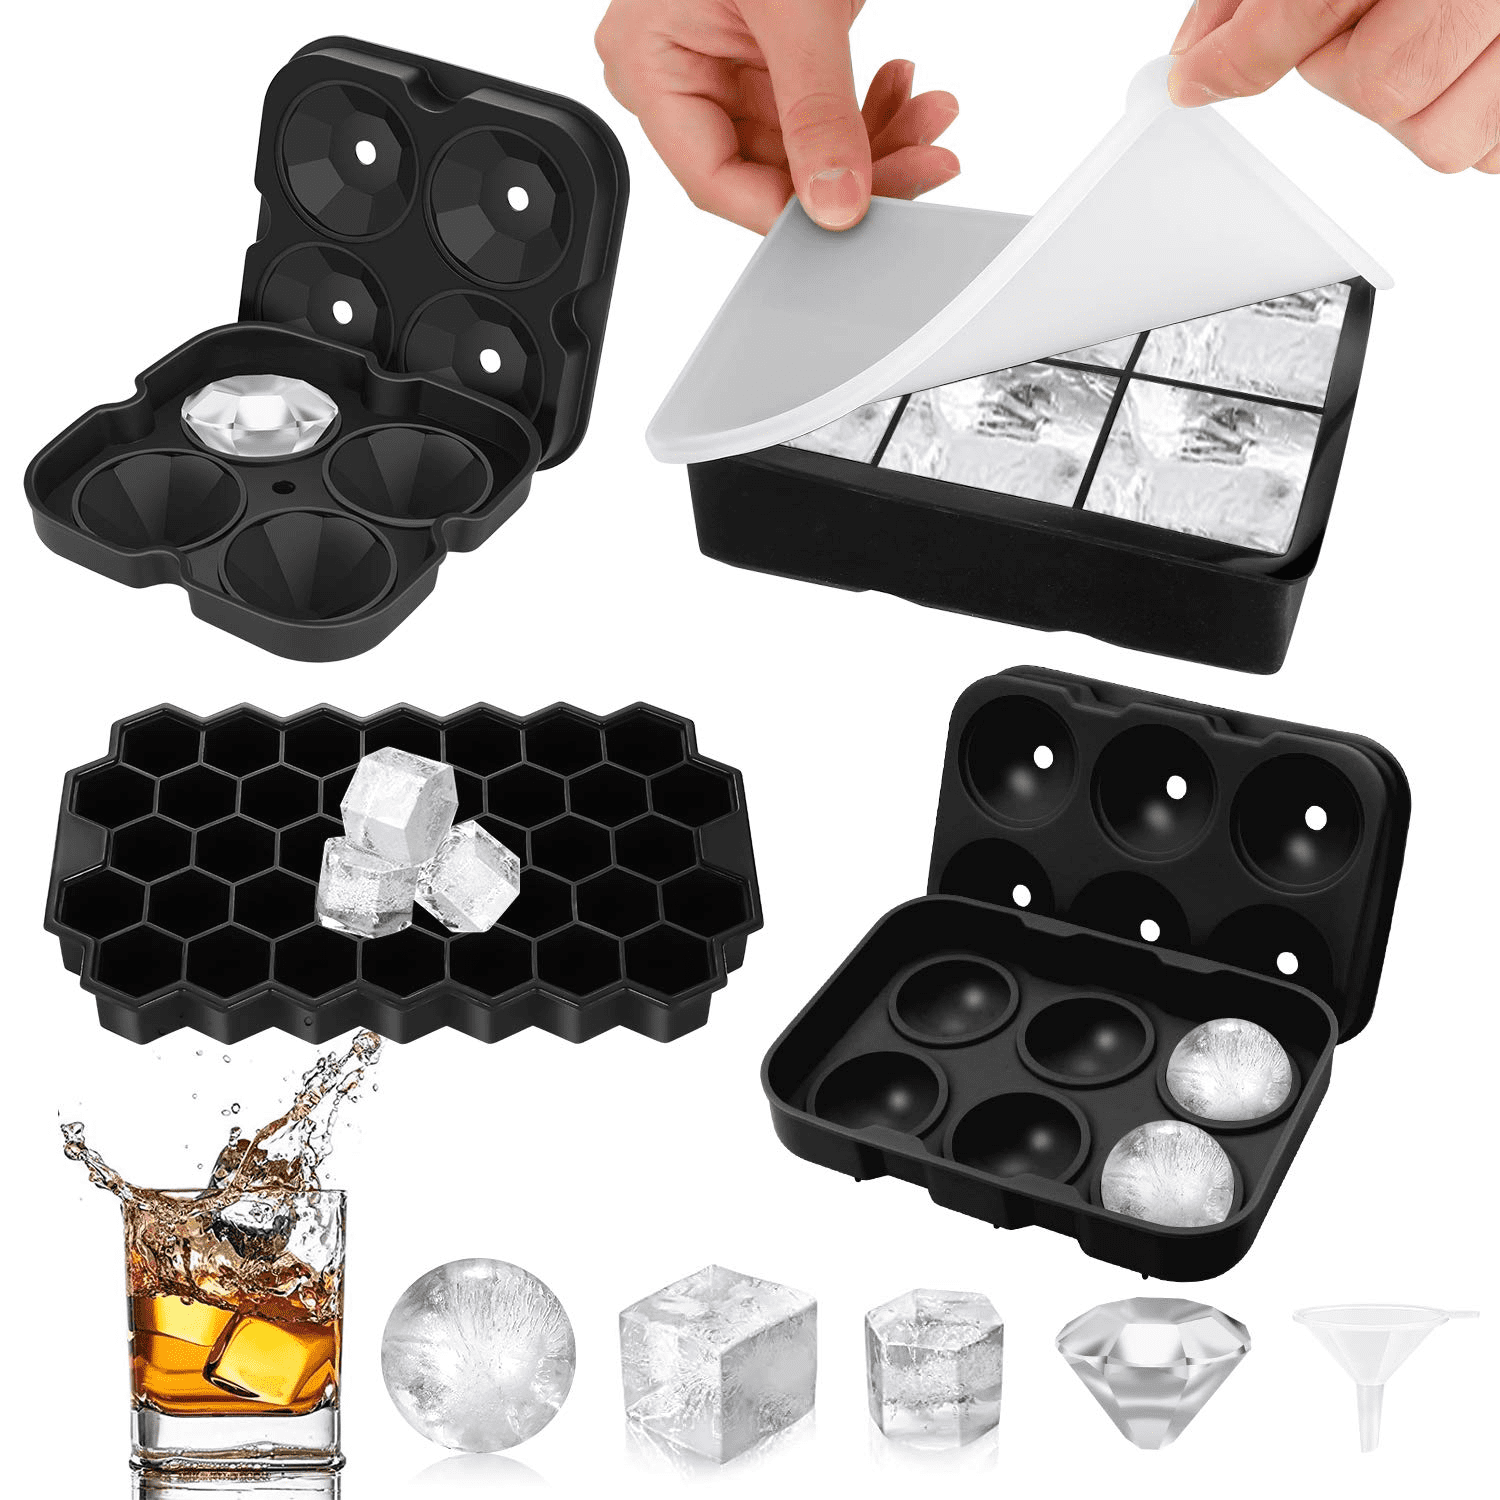 Football ice cube mold,2.5 INCH,4 ices,Silicone Ice Cube Tray with  Lid,Sphere ice mold&Football ice cube mold for Freezer,Large Ice Cube  Molds,Ice